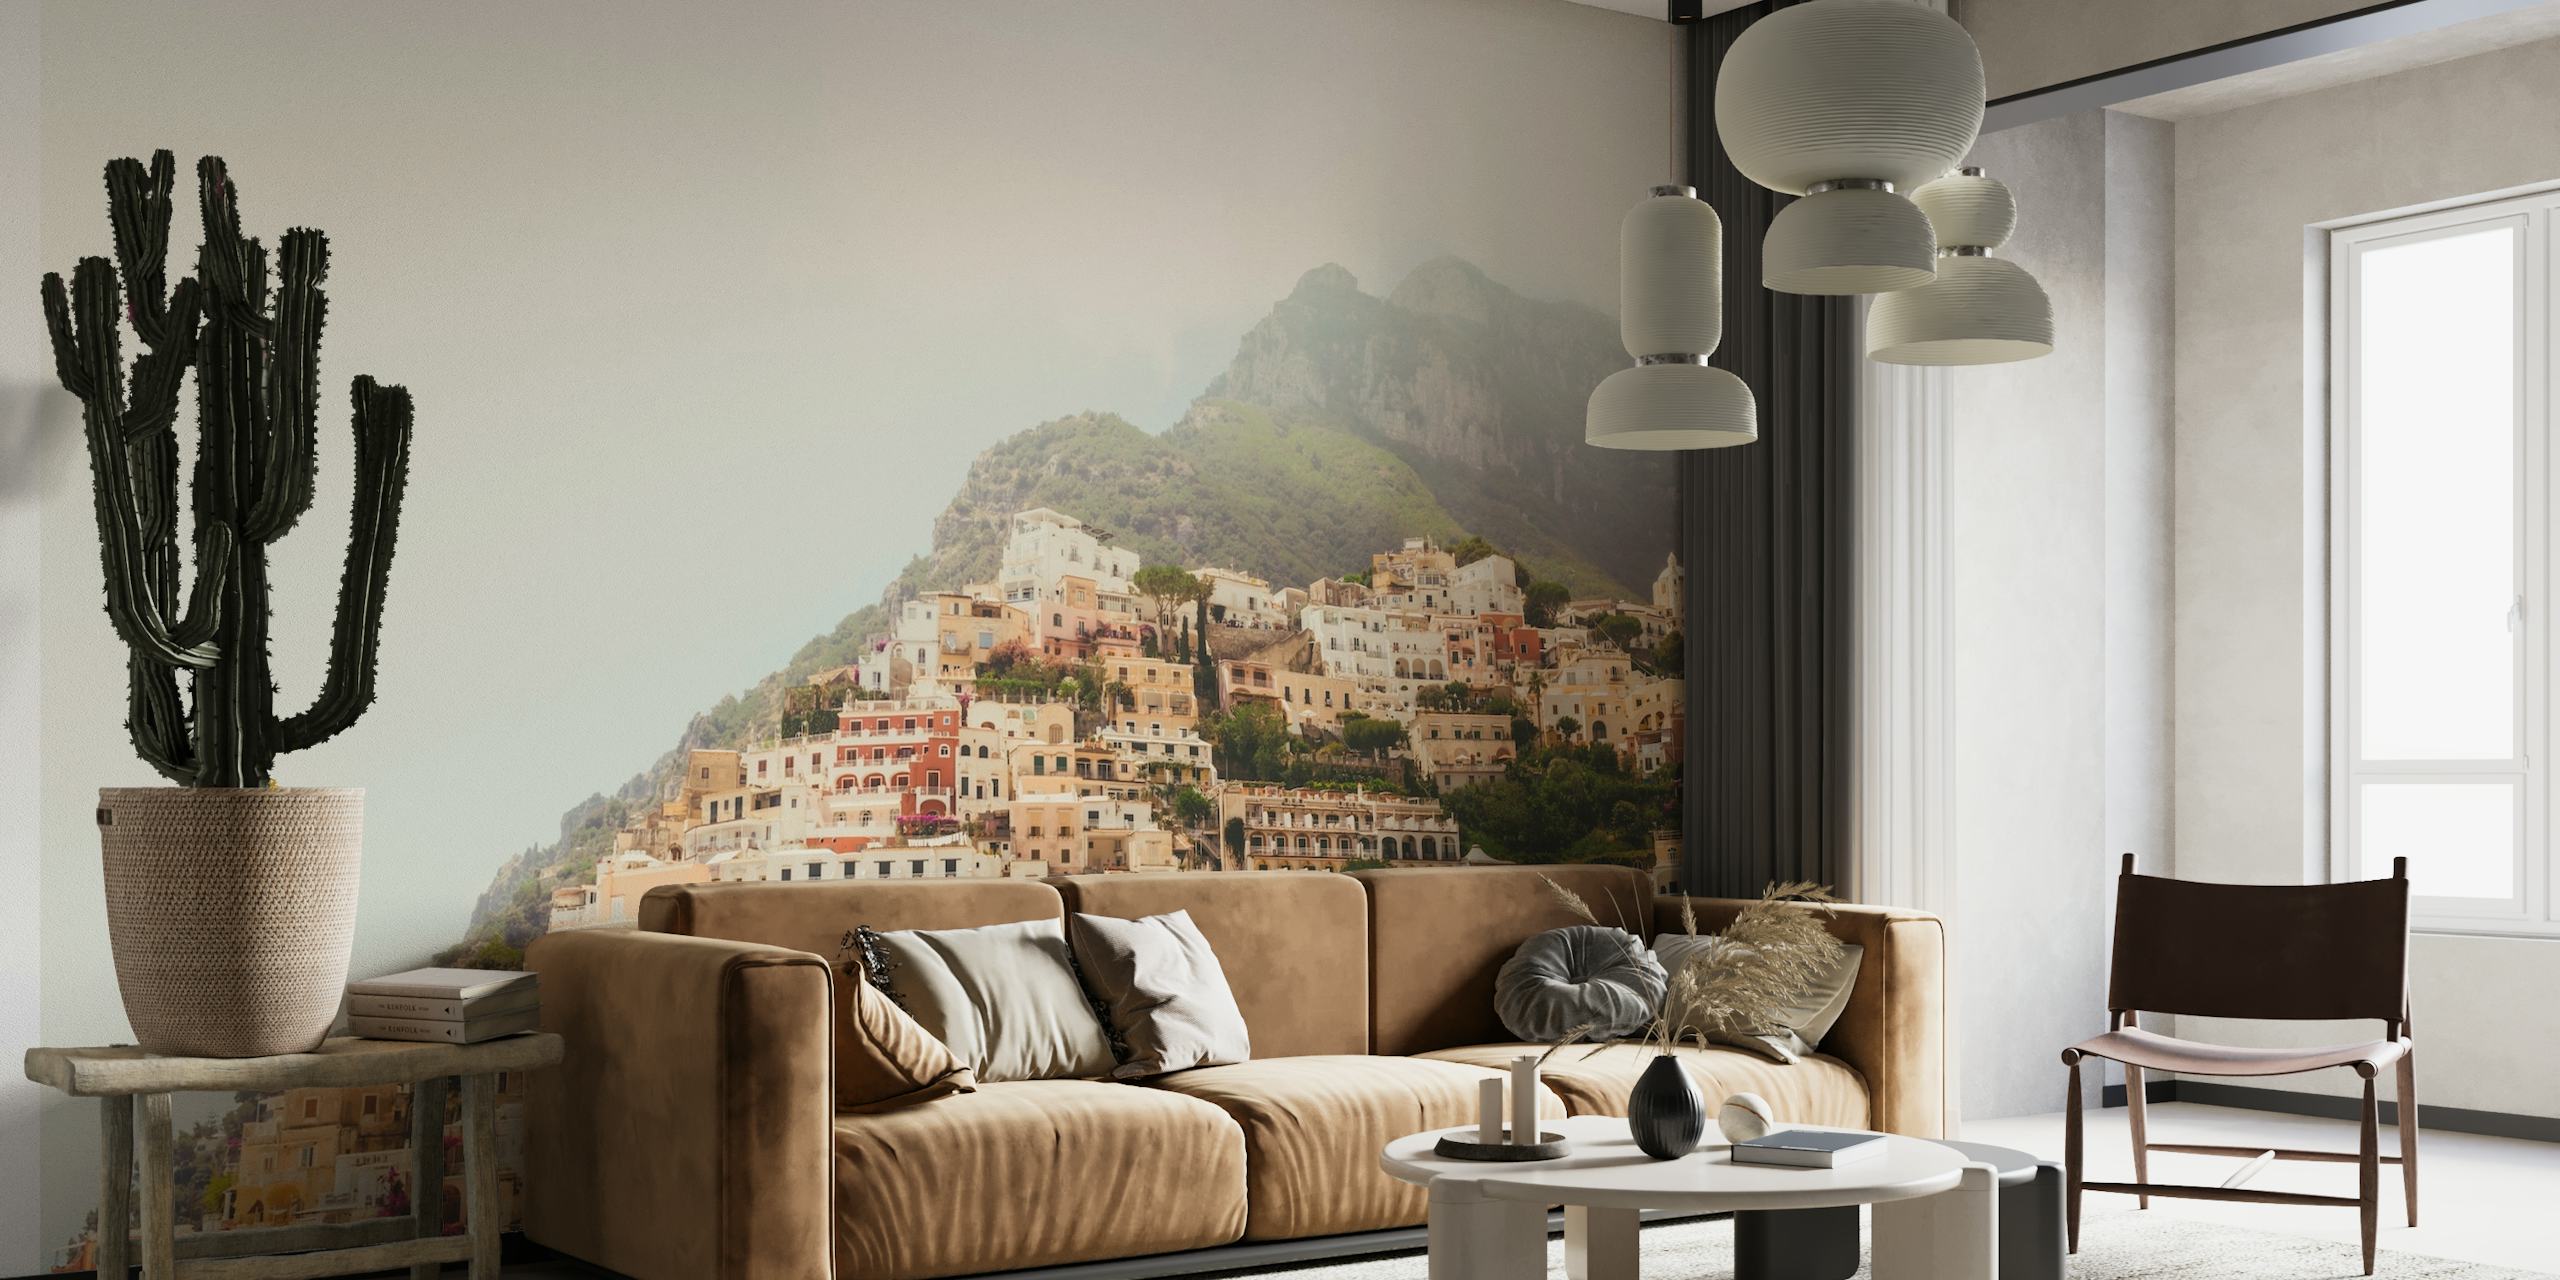 The Amalfi Coast wall mural with pastel houses on cliffs